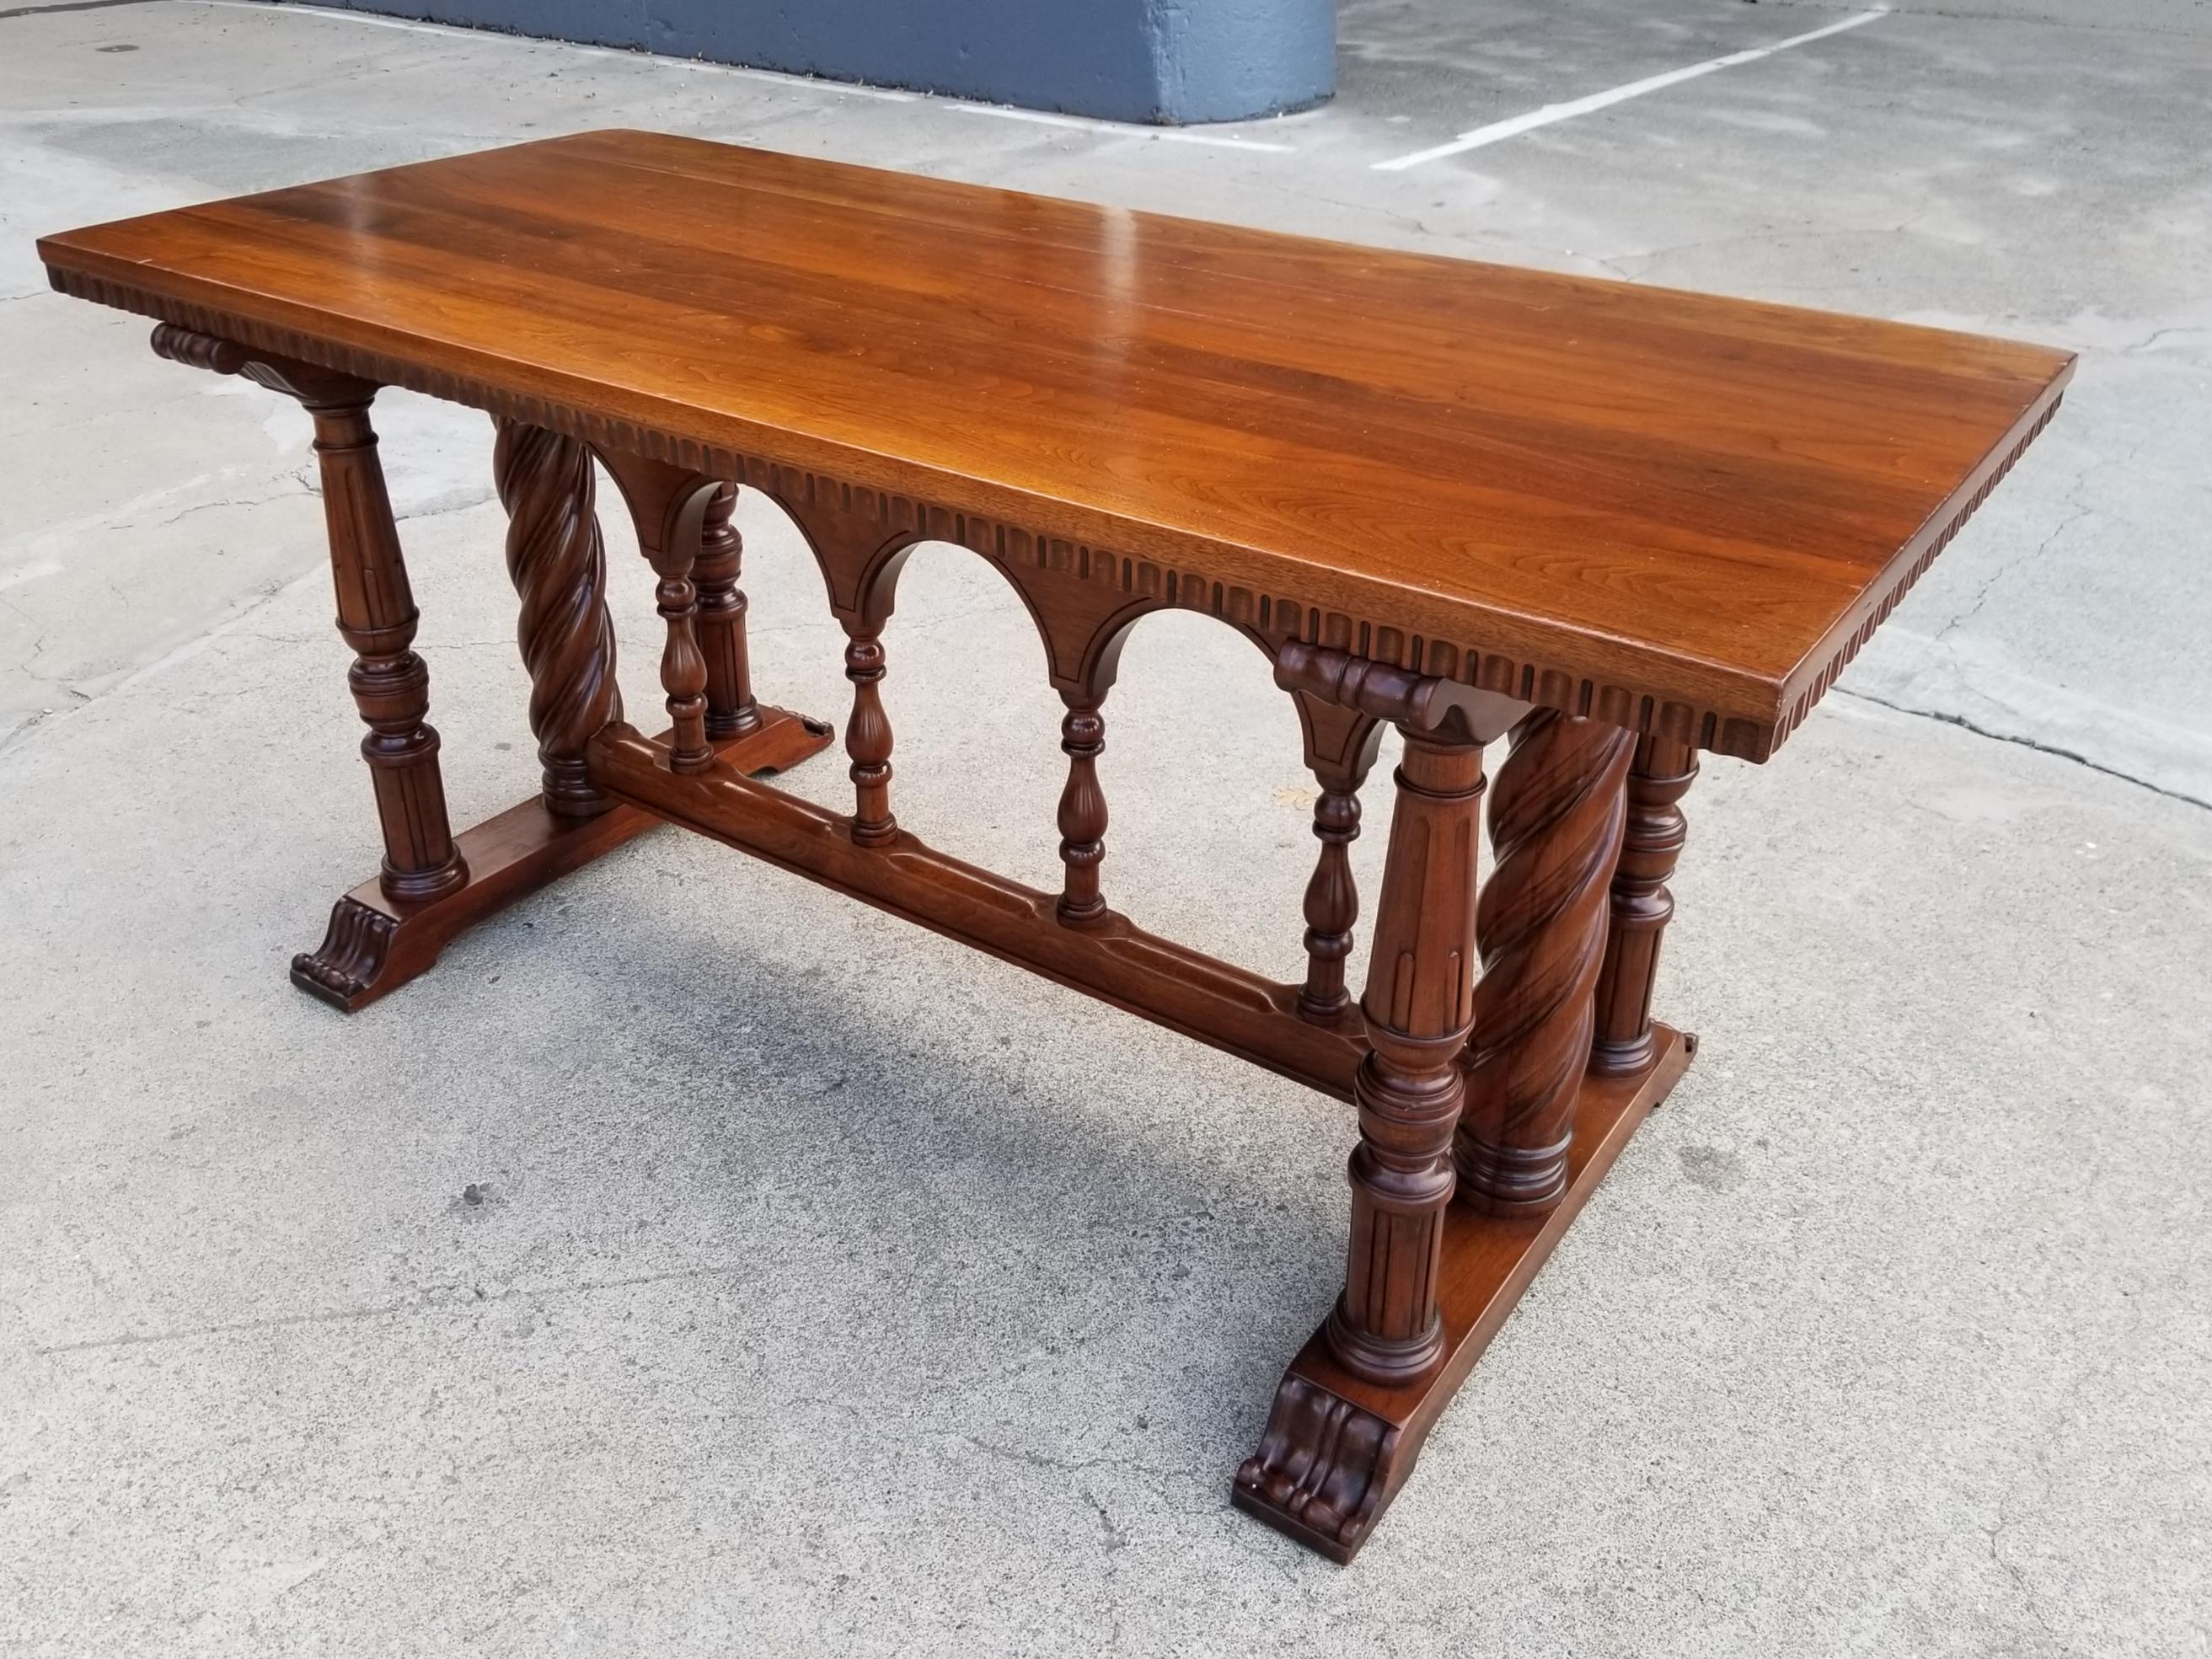 Not often do you find furniture crafted entirely of solid walnut! This early 20th century refectory or library table has remarkable craftsmanship. Classic Spanish Revival design with turned wood columns and arched center support. This piece might